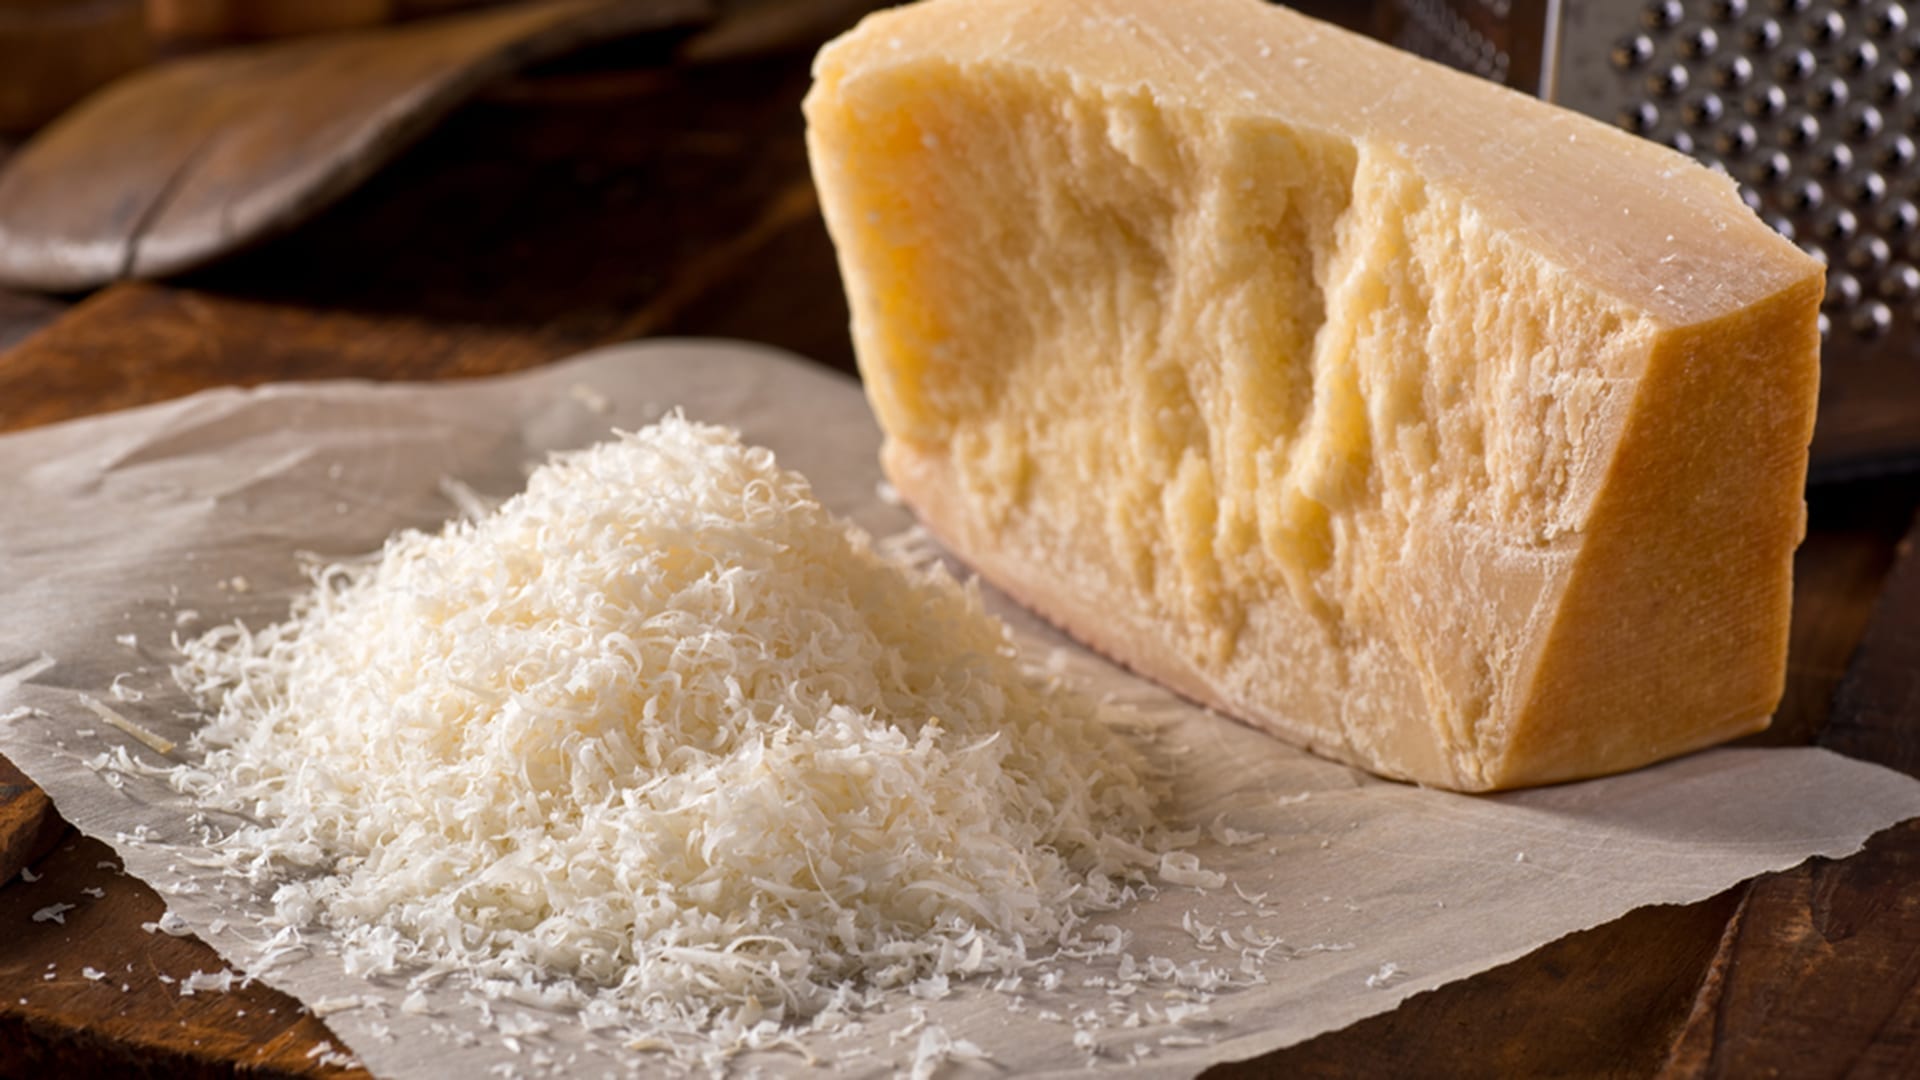 10 Cheesy Facts About the Parmesan Cheese That Came From Italy 8